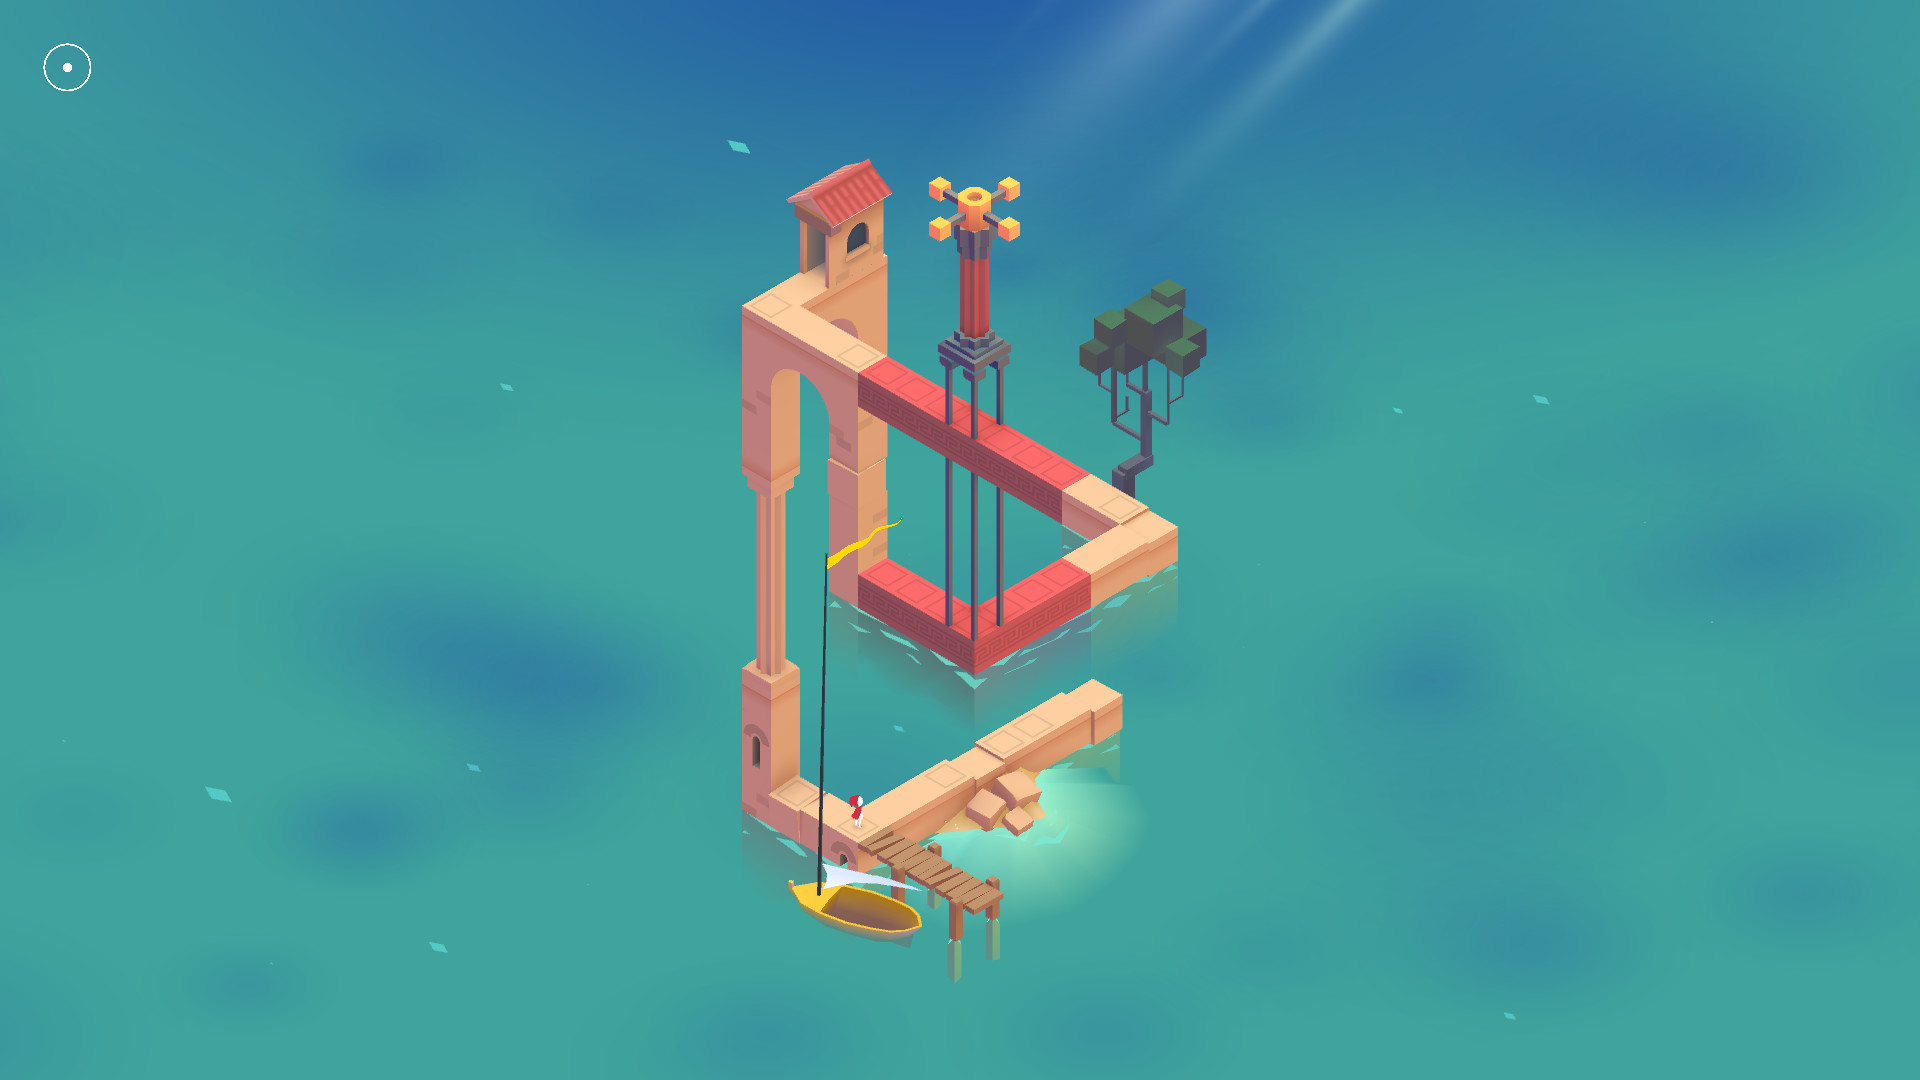 Monument Valley 2: Panoramic Edition Steam CD Key